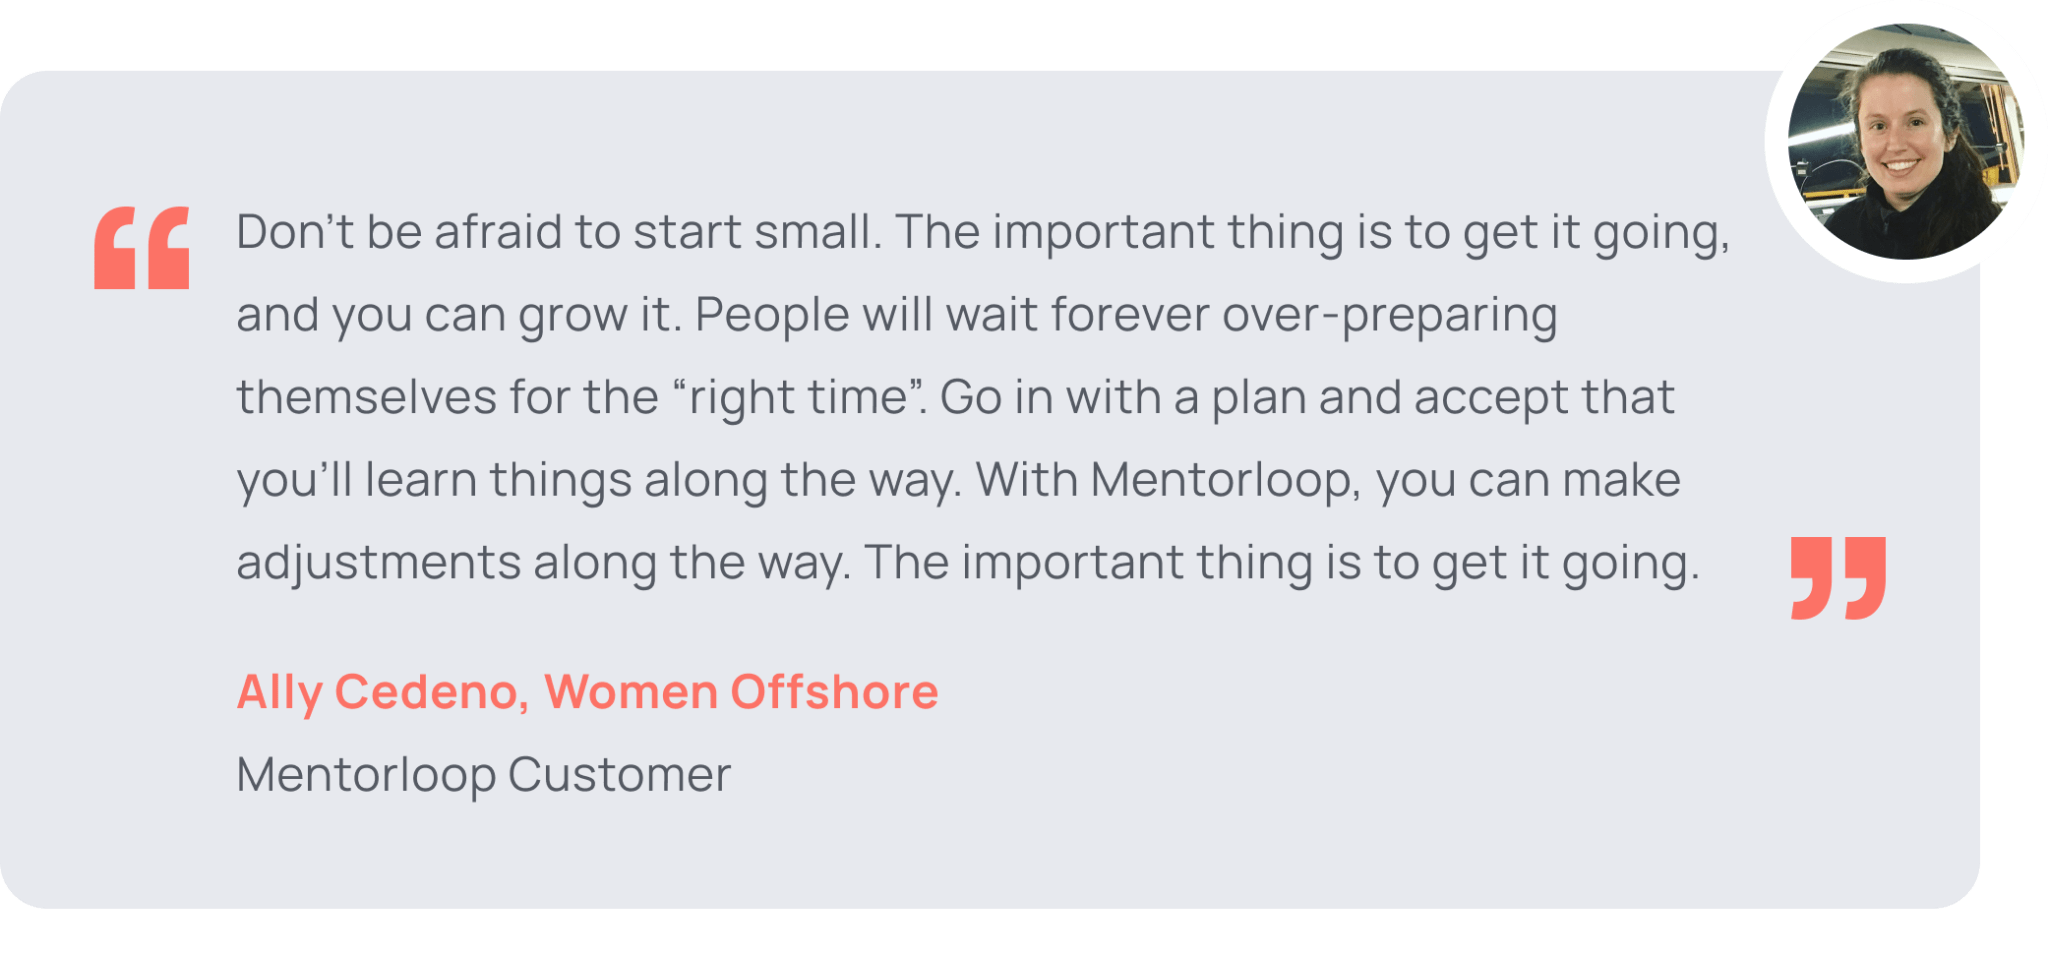 Mentorloop Mentoring Software To Easily Match Your People 8291